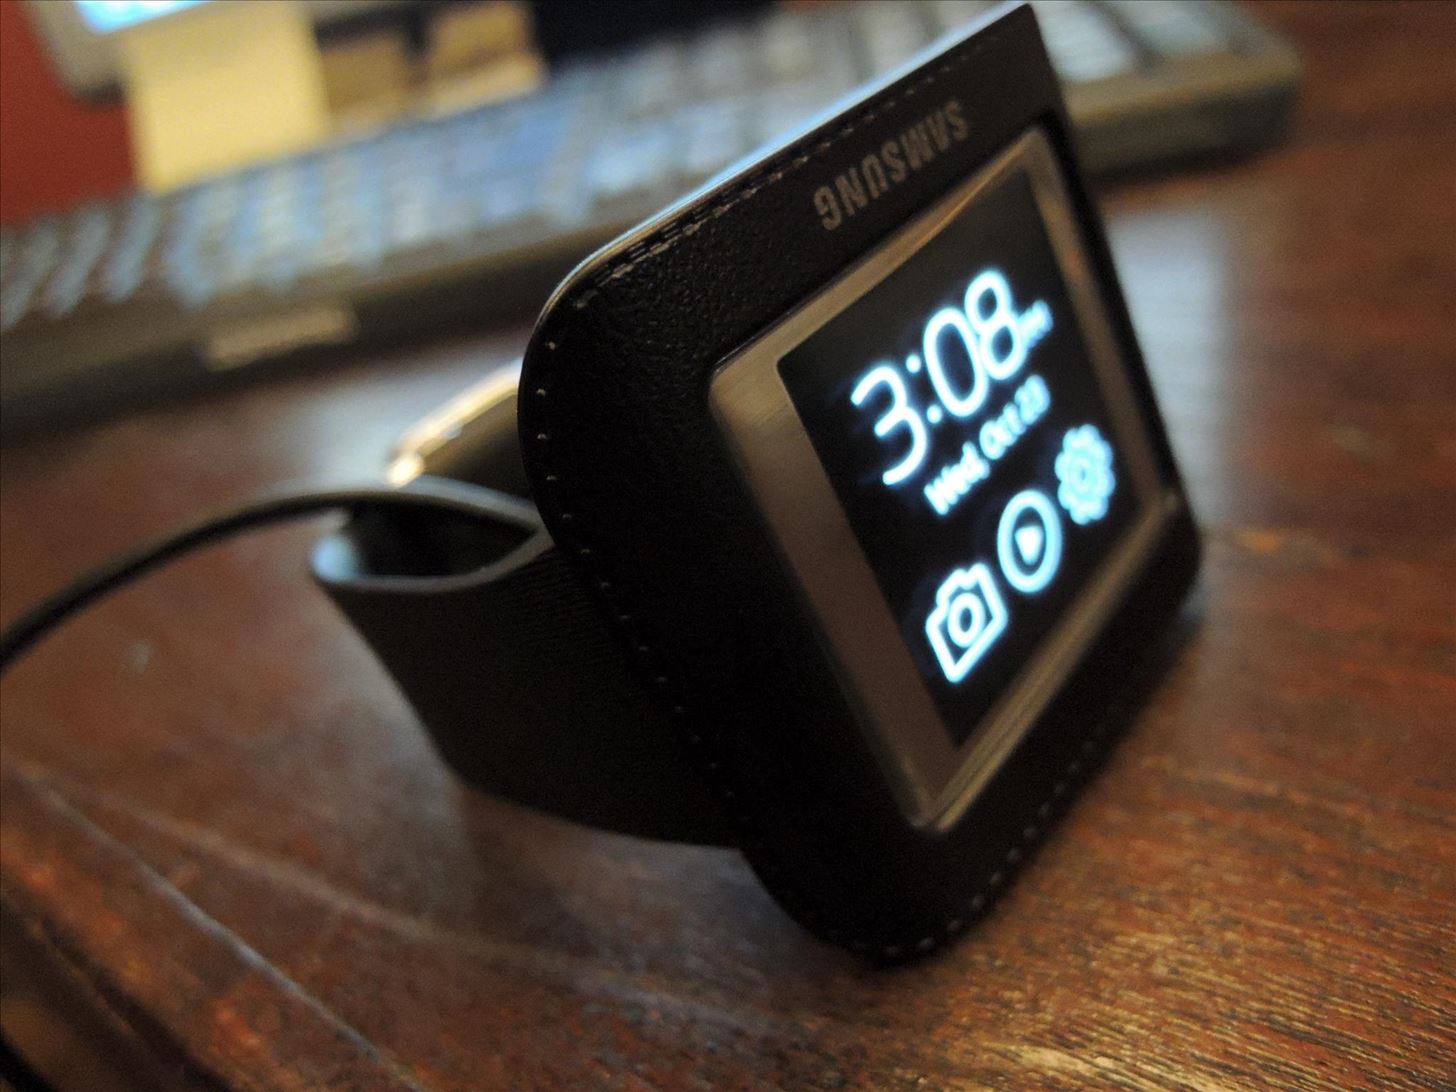 How to Take a Screenshot on Your Samsung Galaxy Gear Smartwatch